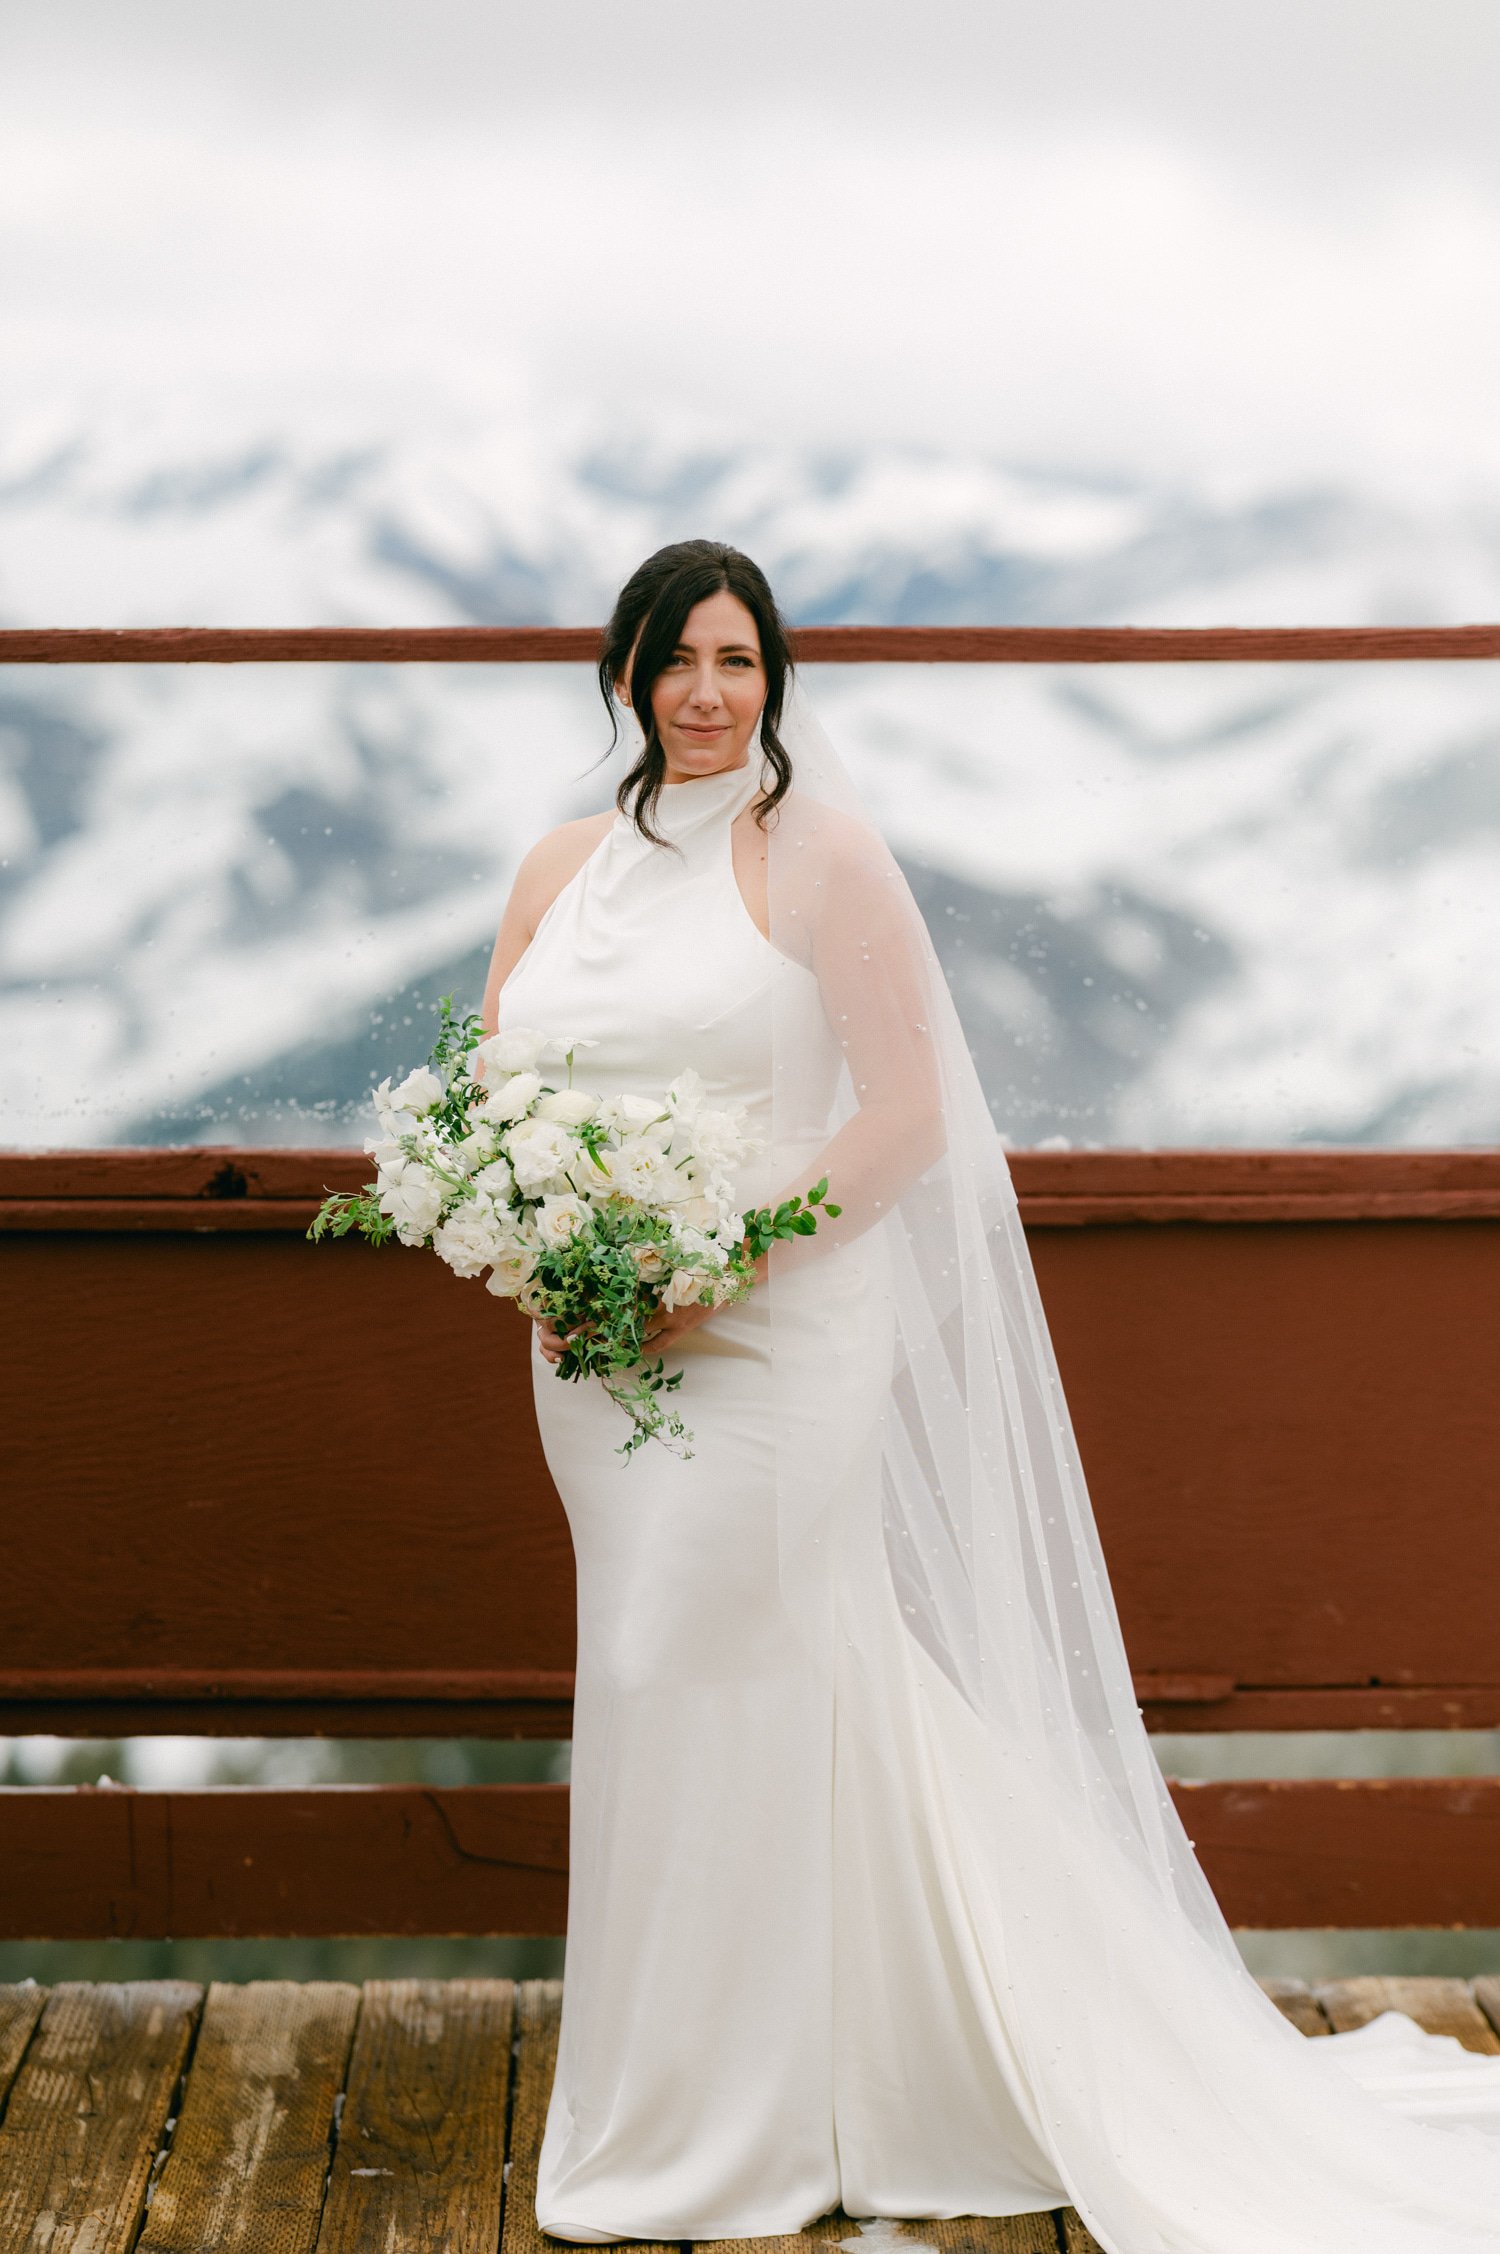 Sun Valley Roundhouse Wedding photos of the bride with her stunning wedding dress and long veil with pearl accents while holding her wedding bouquet with white flowers and greenery